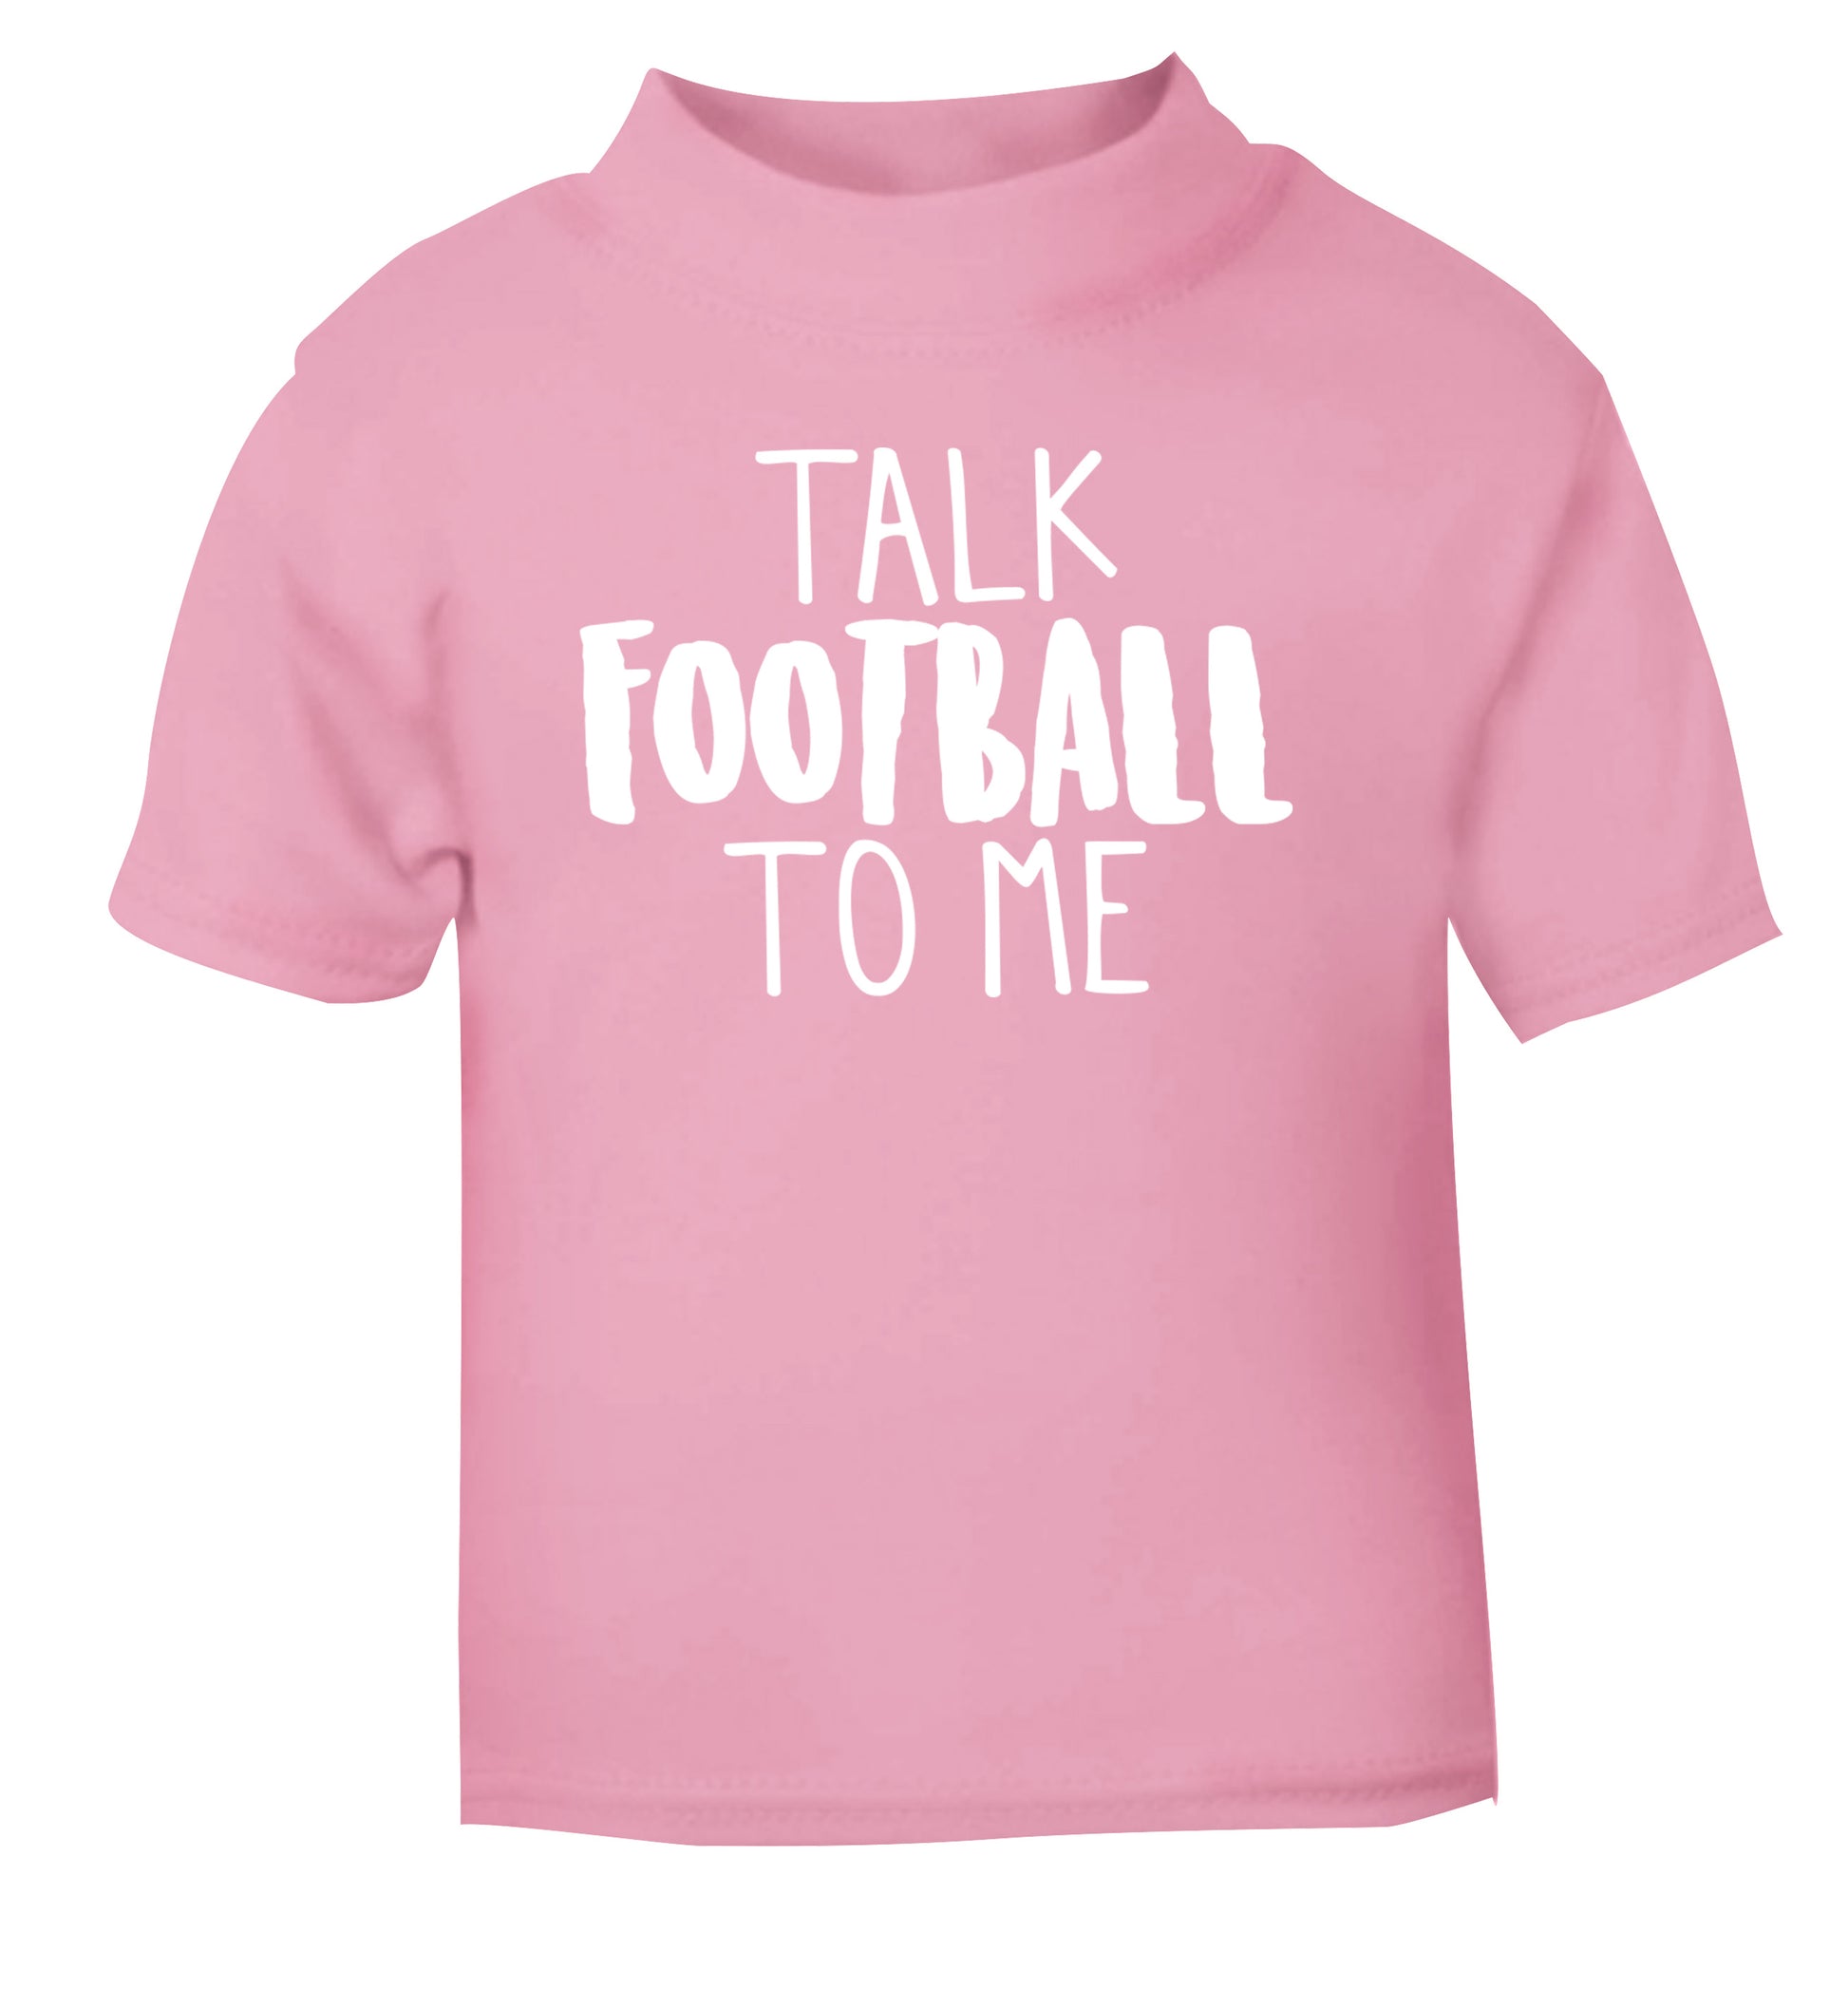 Talk football to me light pink Baby Toddler Tshirt 2 Years